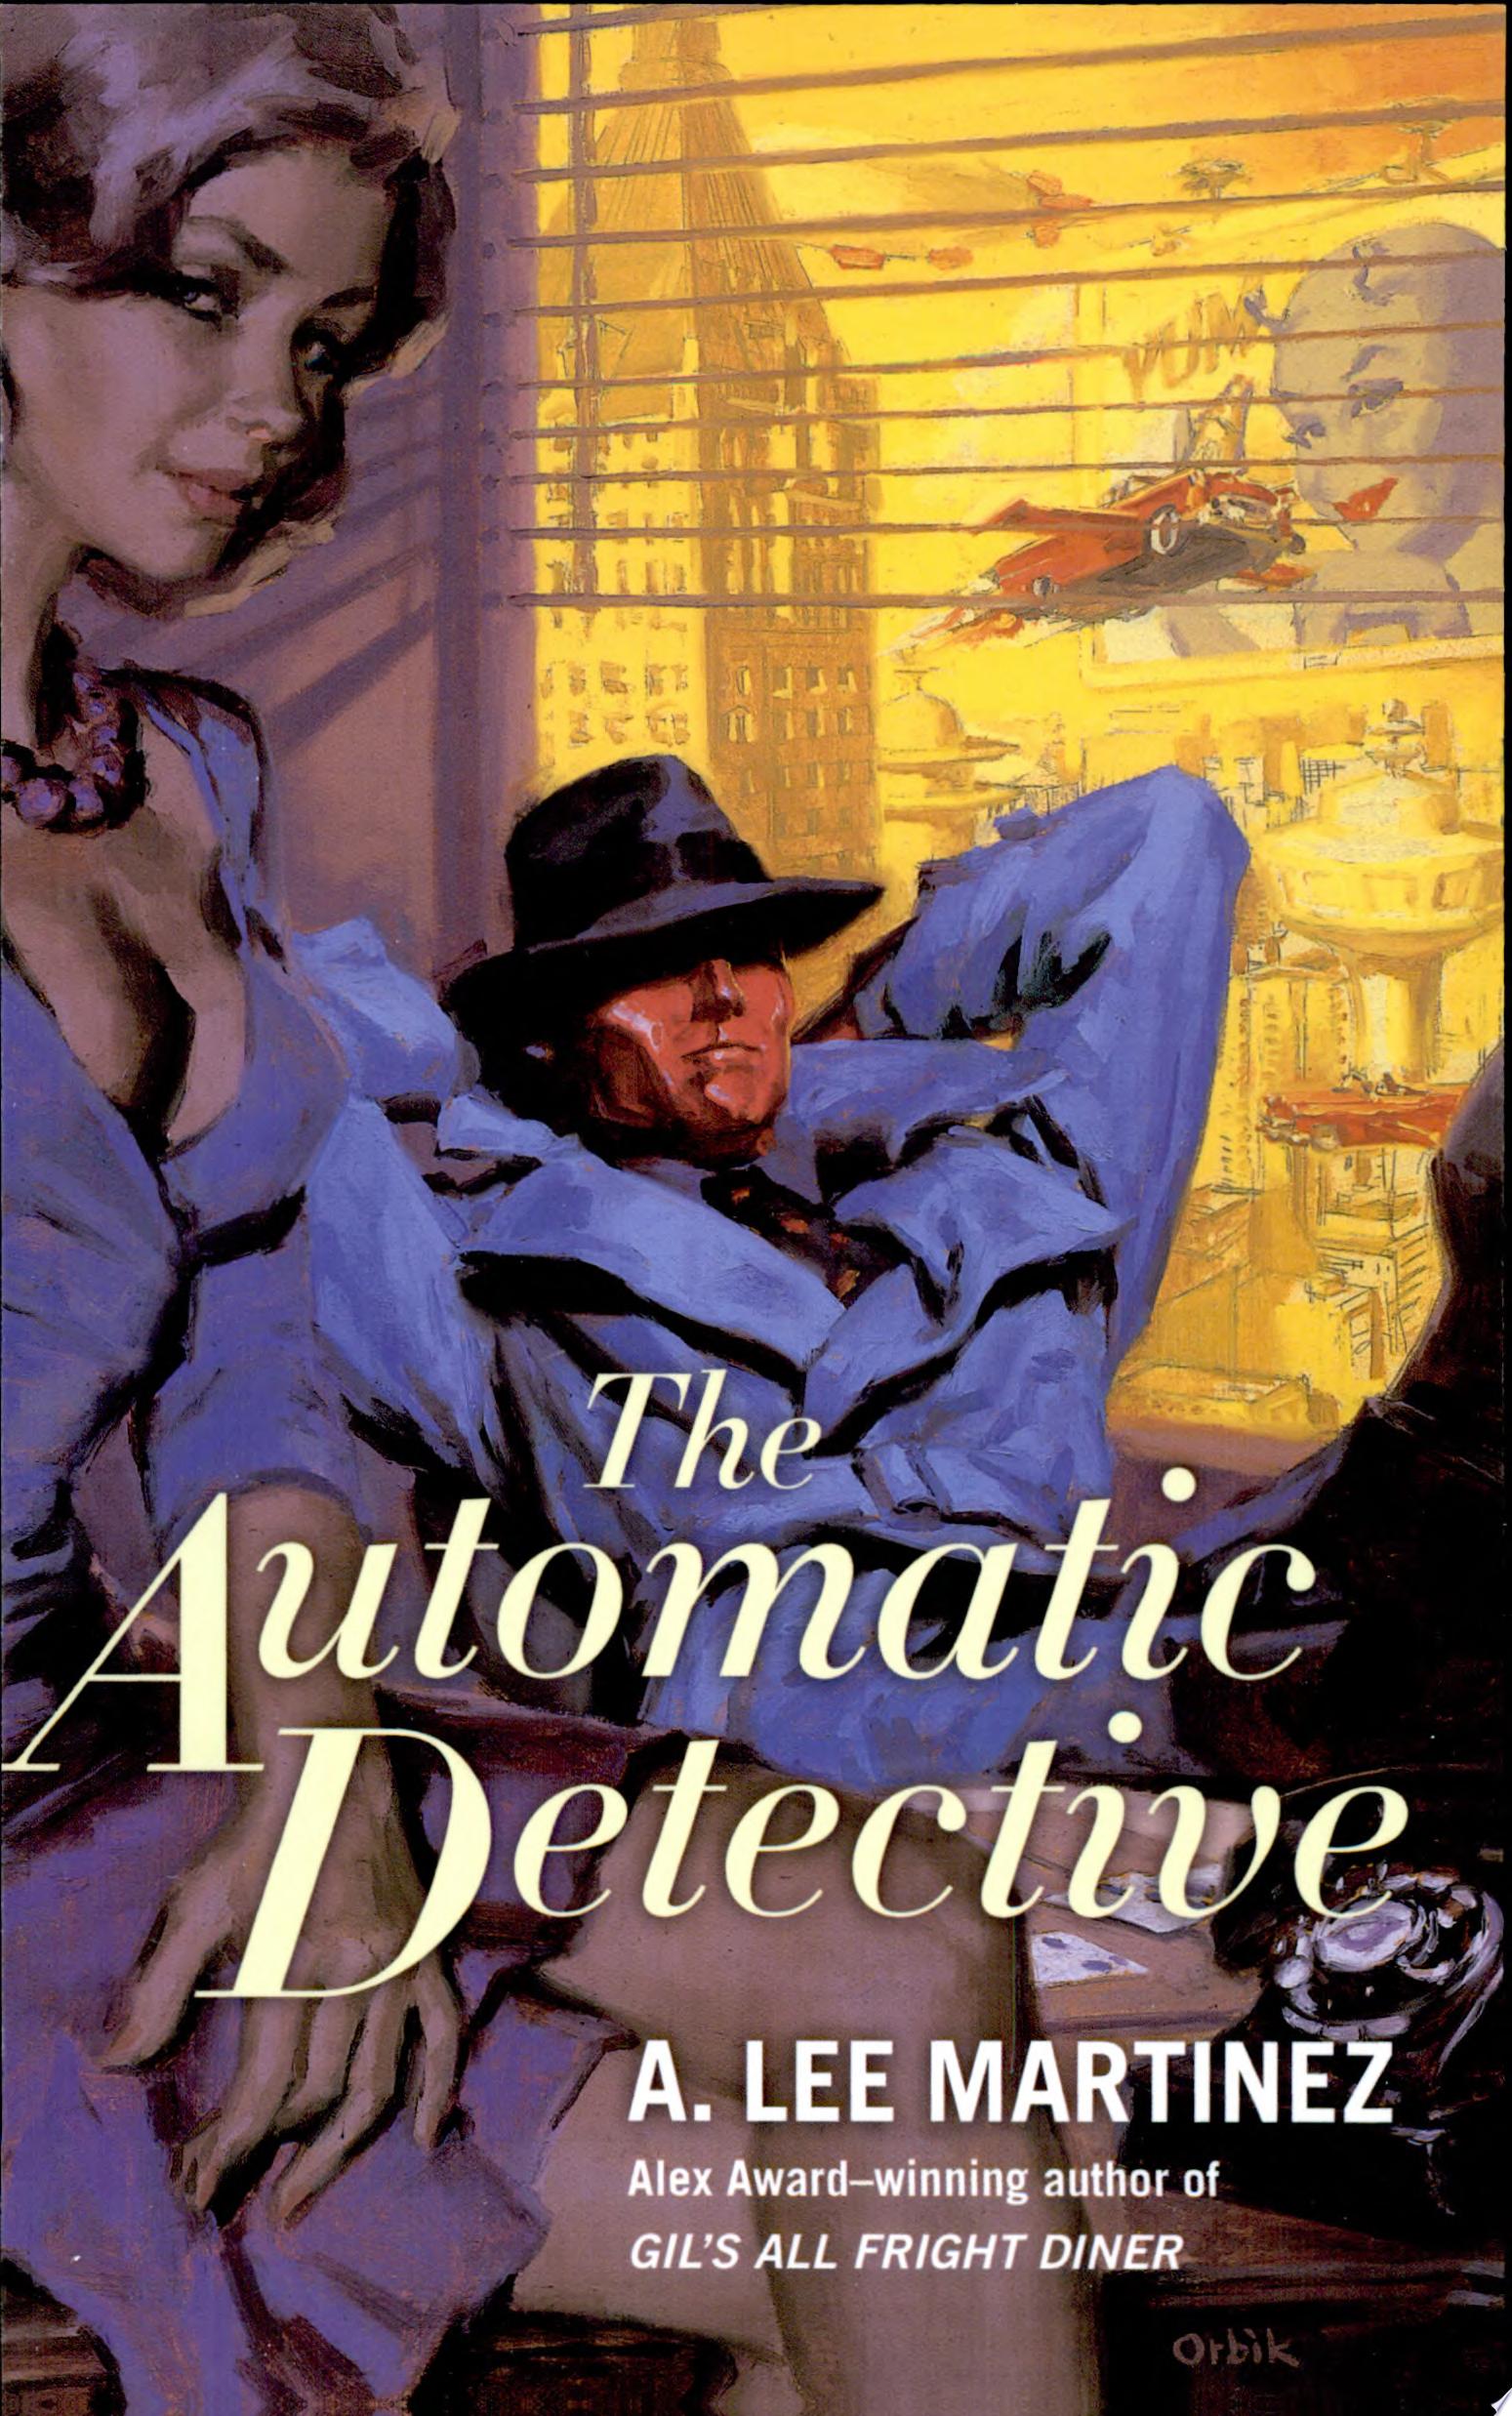 Image for "The Automatic Detective"